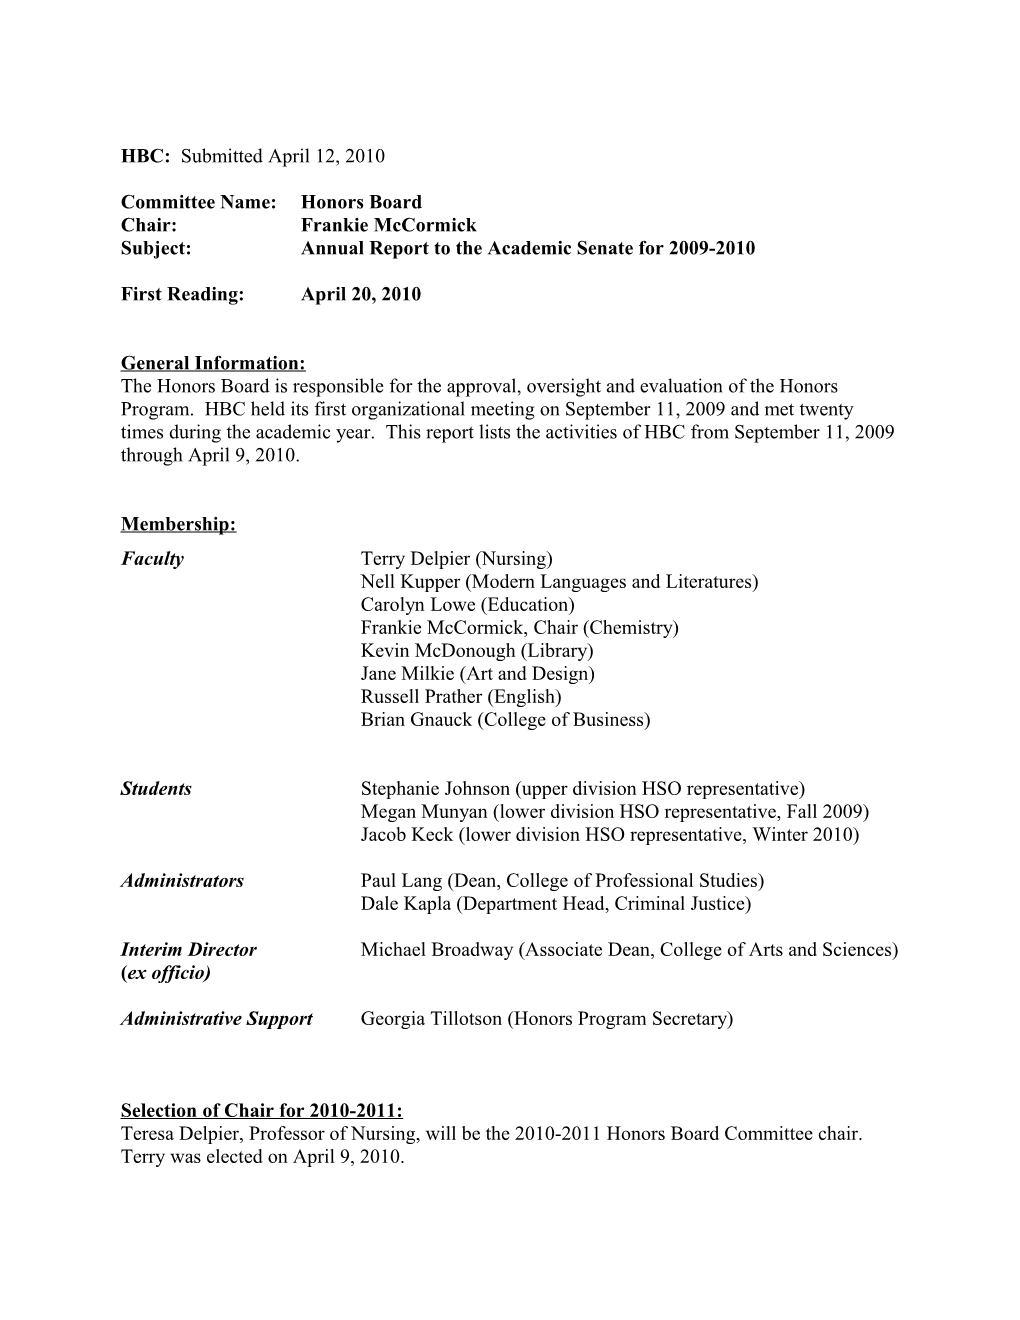 HBC Annual Report to the Academic Senate for 2009-2010